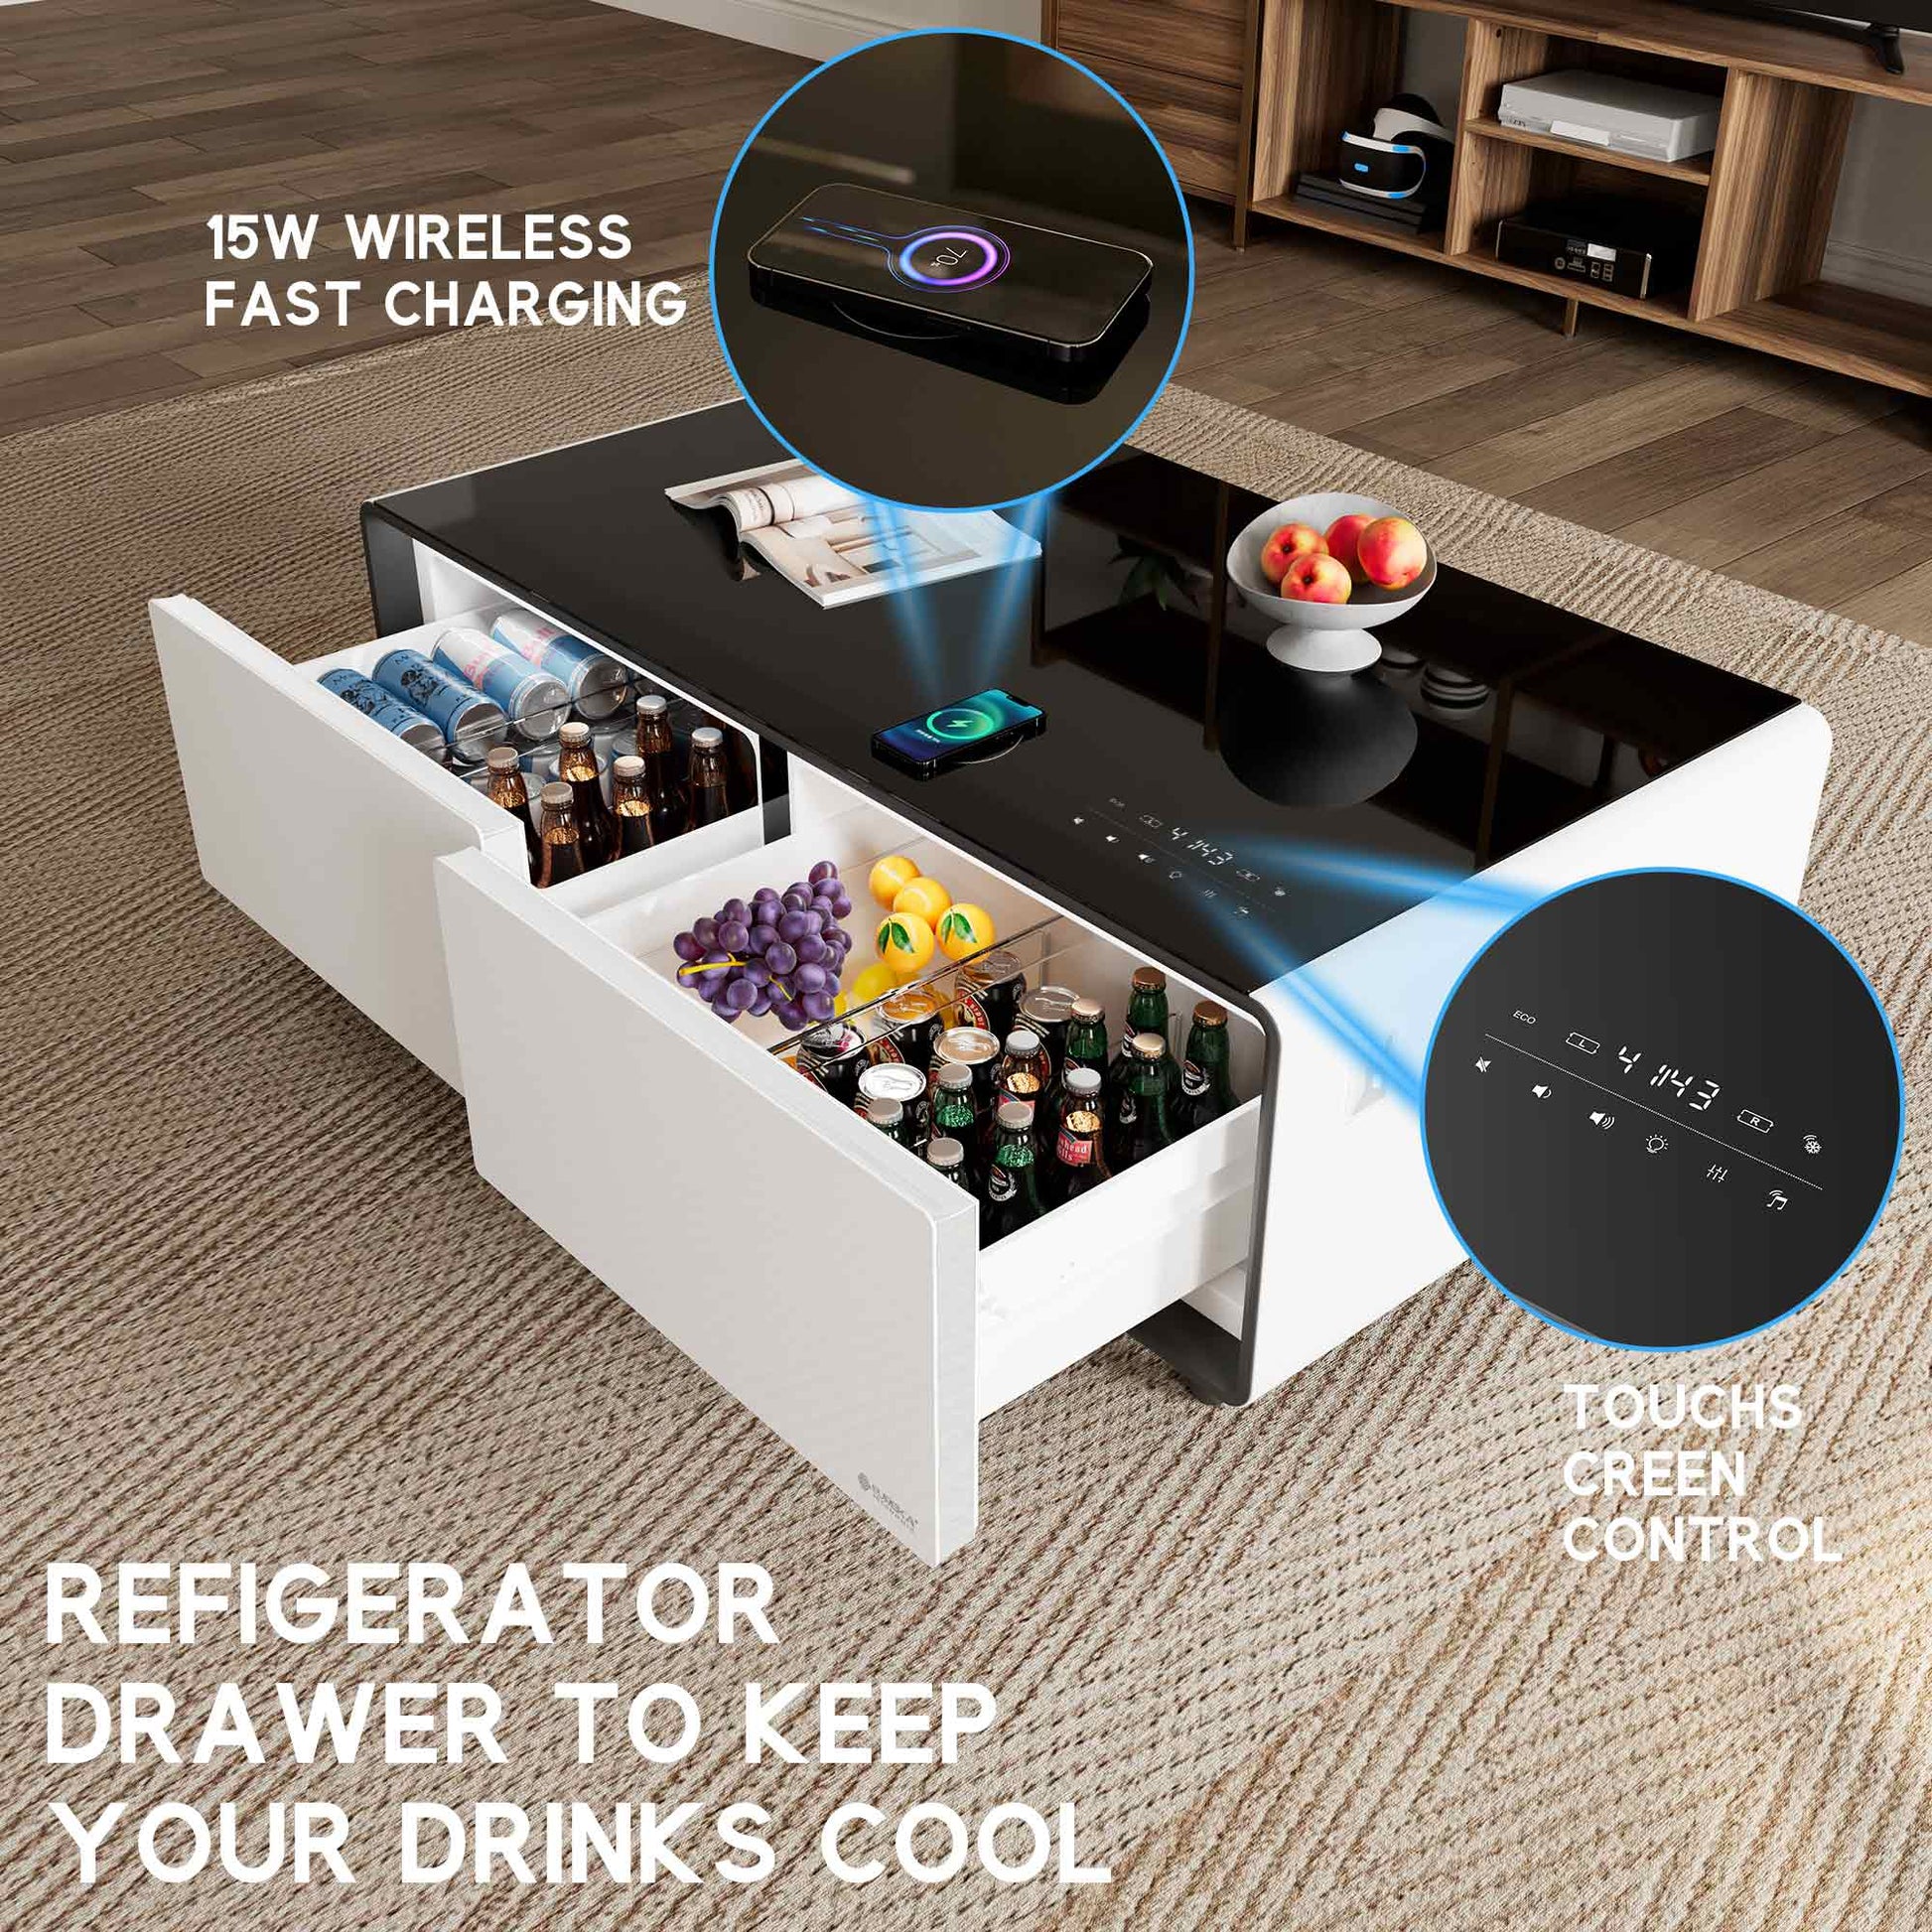 50 inch White Smart Fridge Coffee Table with Bluetooth Speakers, Lifestyle Product Image, 15W Wireless Fast Charging, Touch Screen Controls